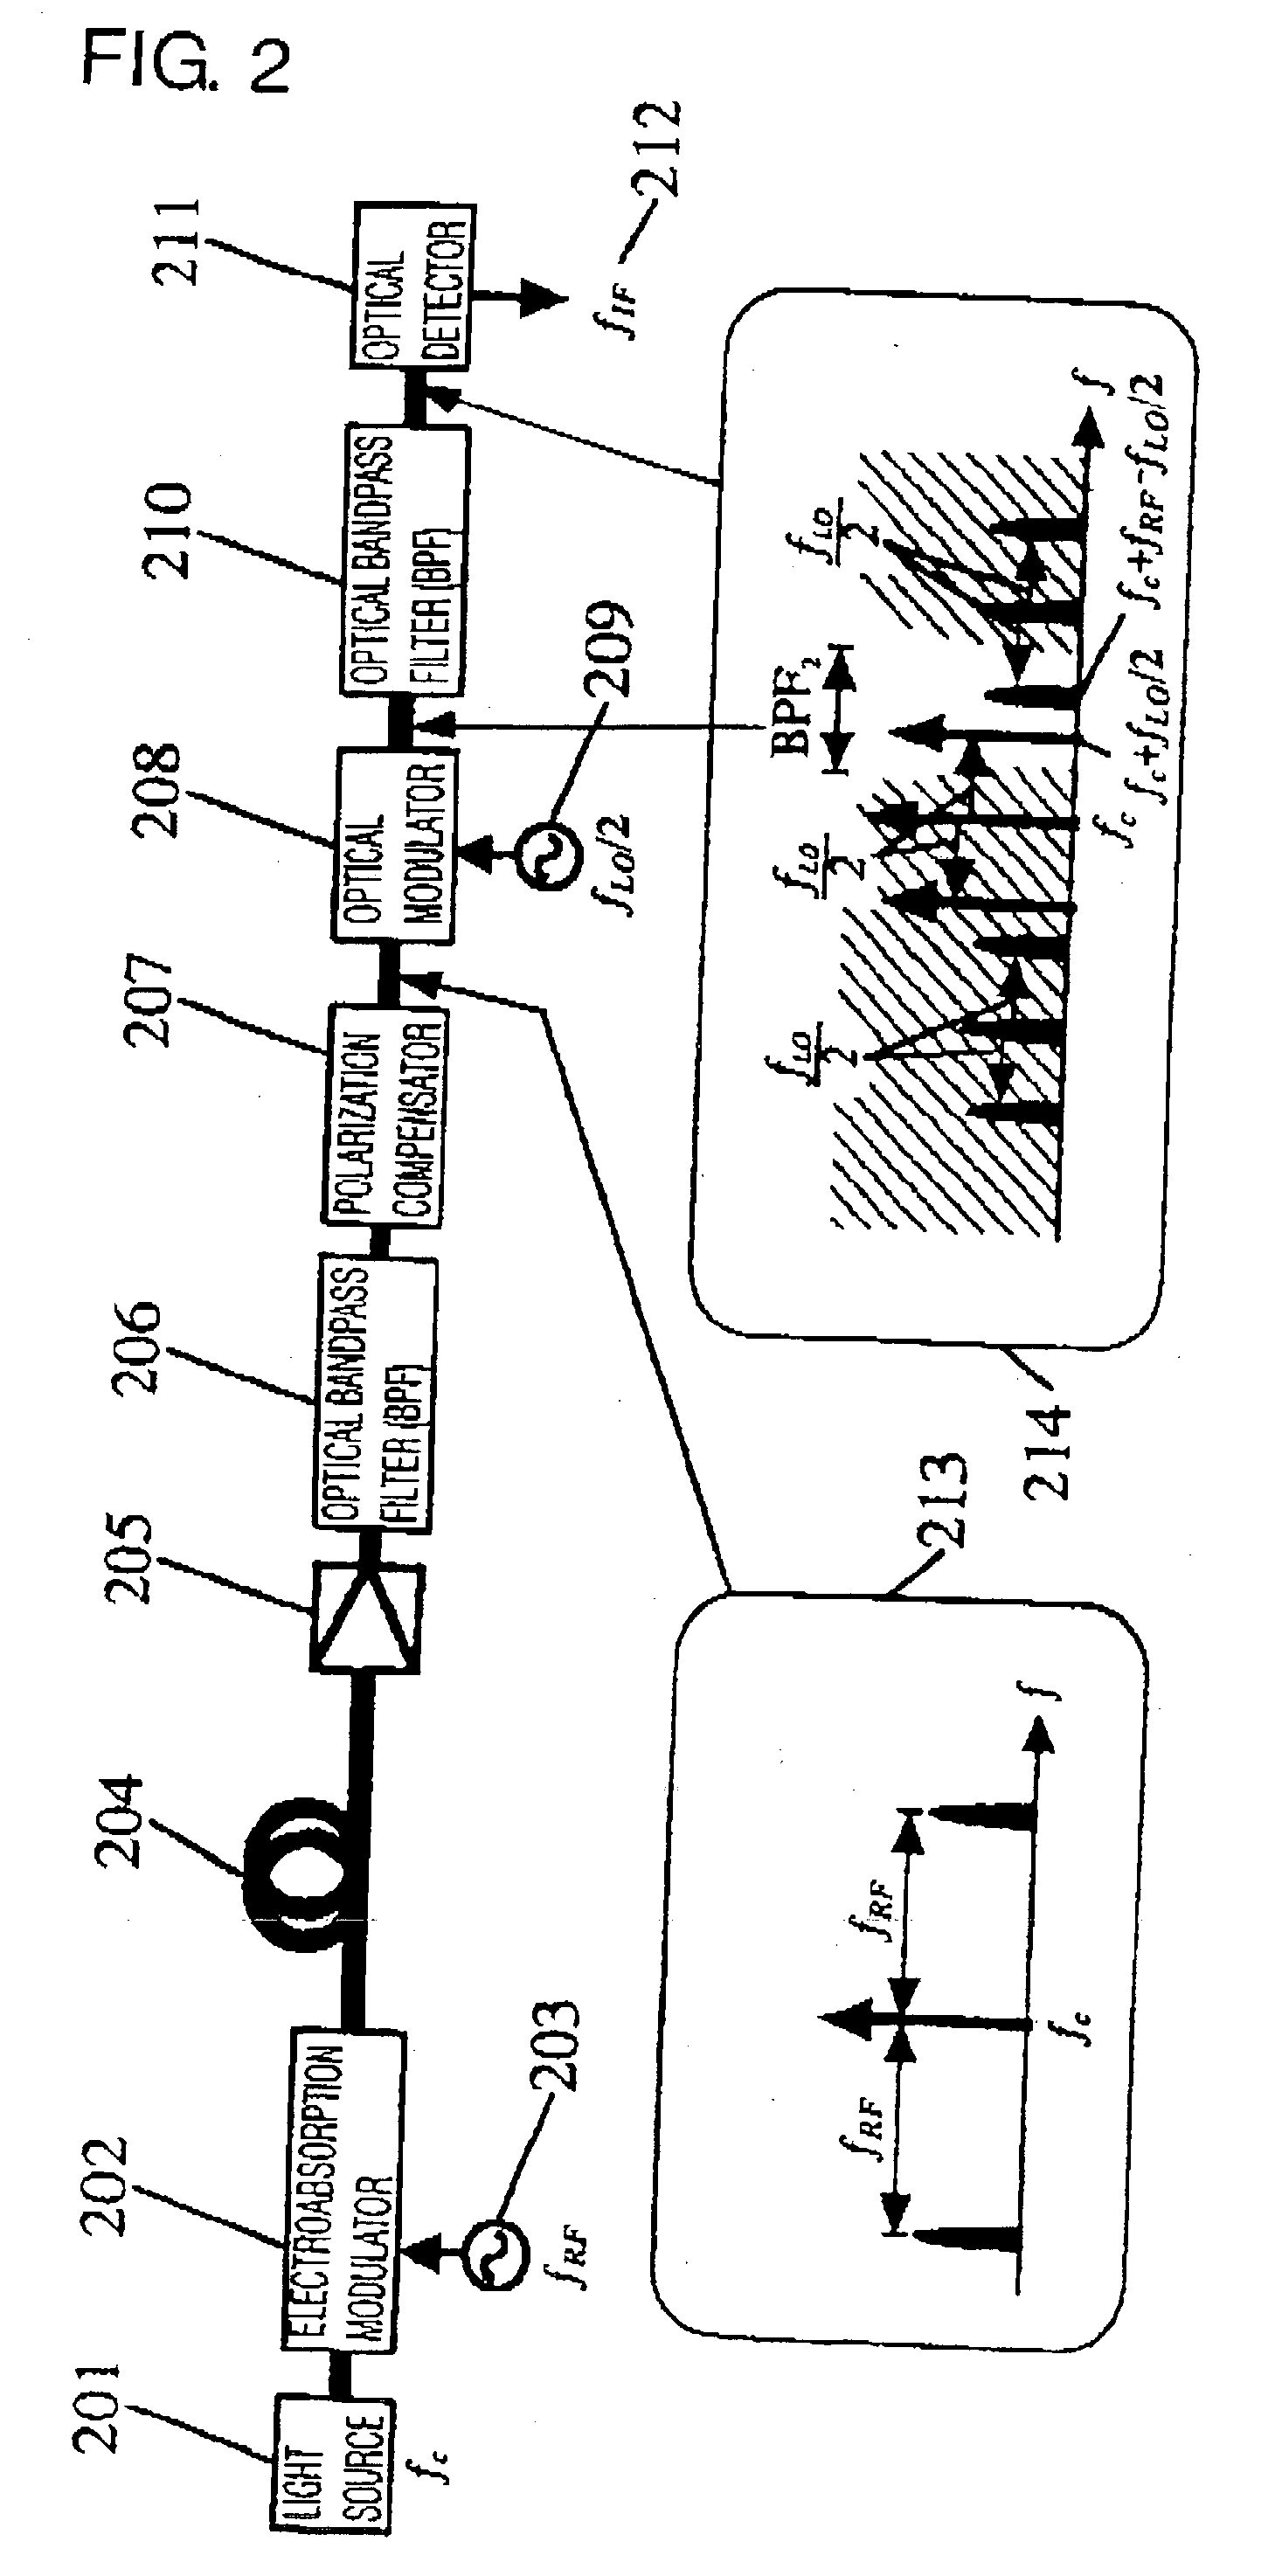 Modulated light signal processing method and apparatus